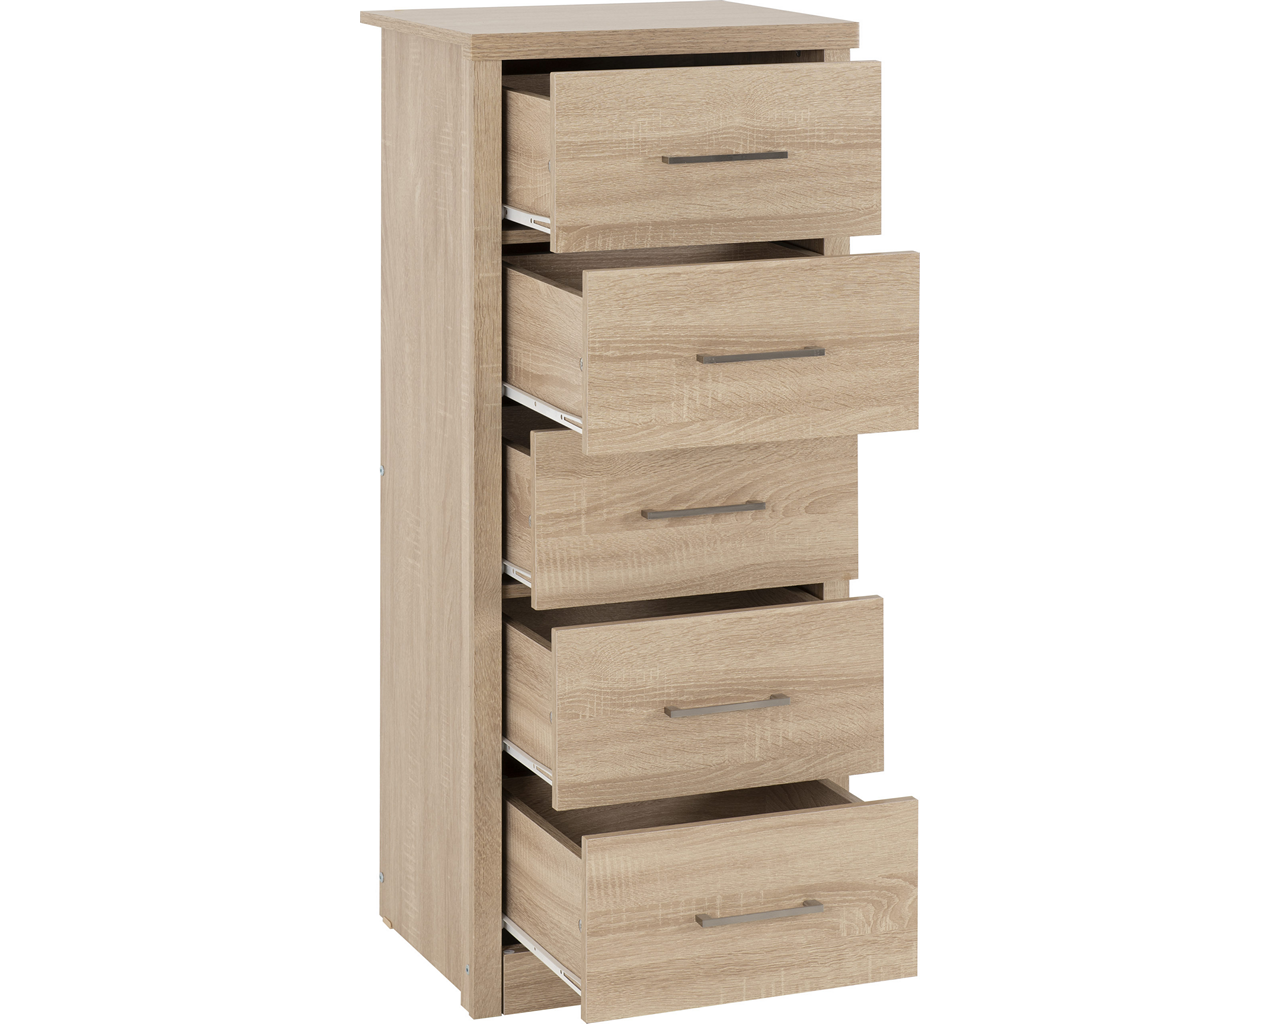 Lisbon Narrow Chest of Drawers